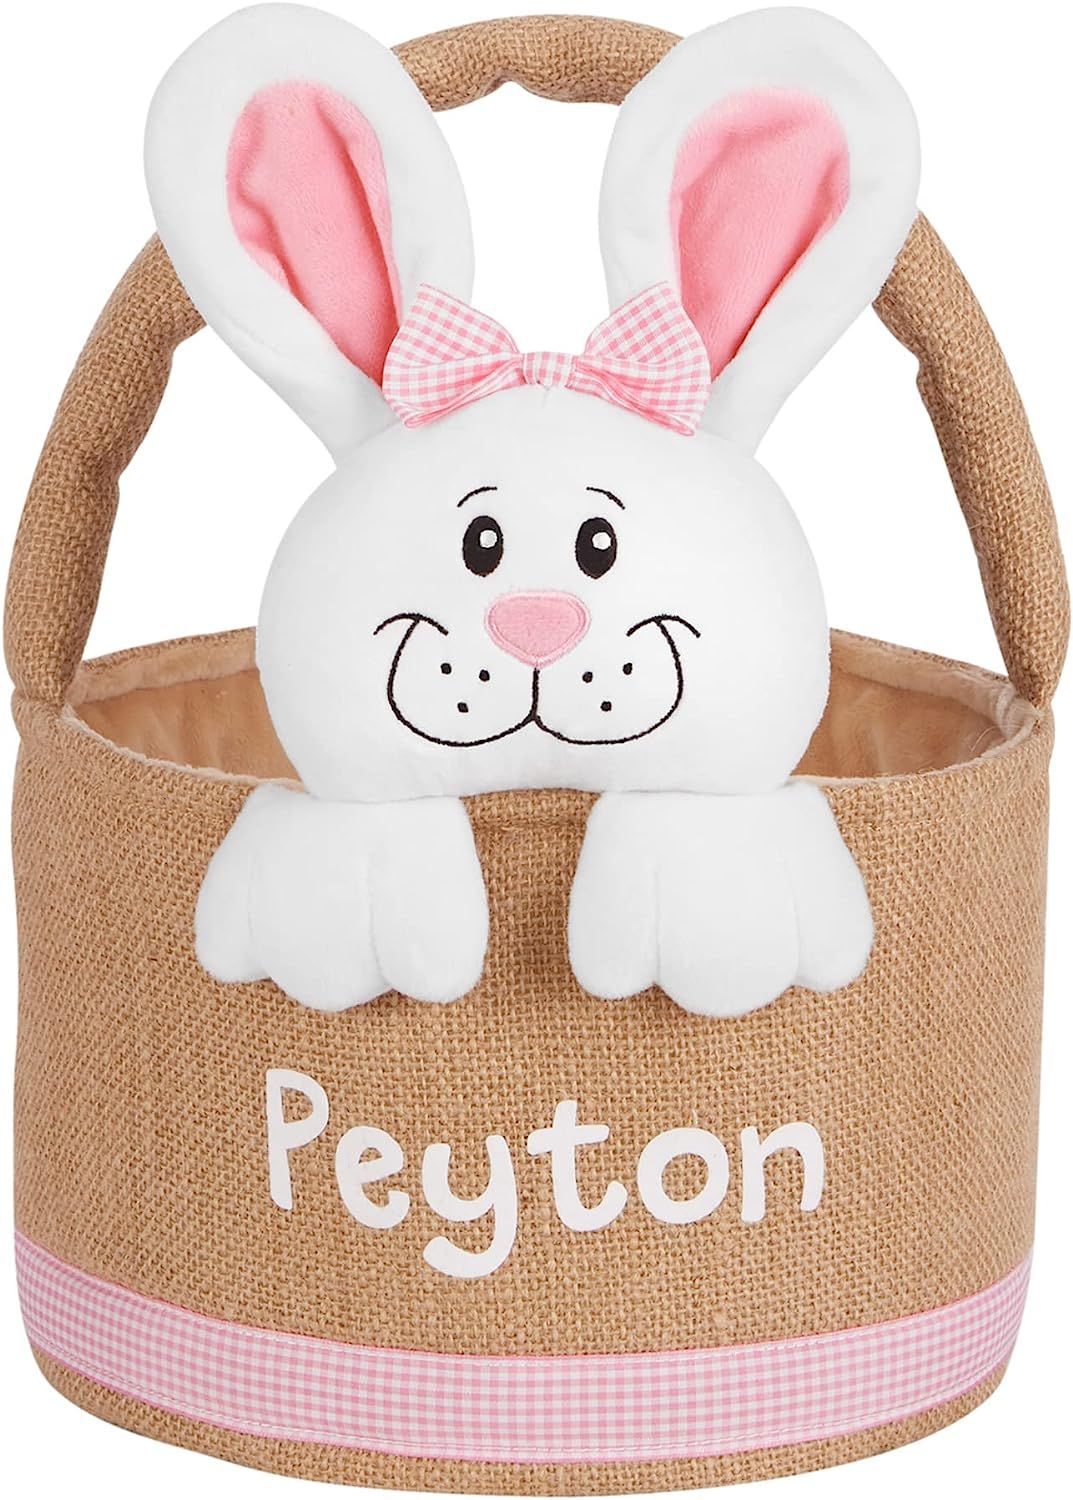 Let's Make Memories Personalized Burlap Easter Basket for Kids - w/3-D Stuffed Bunny - Pink | Amazon (US)